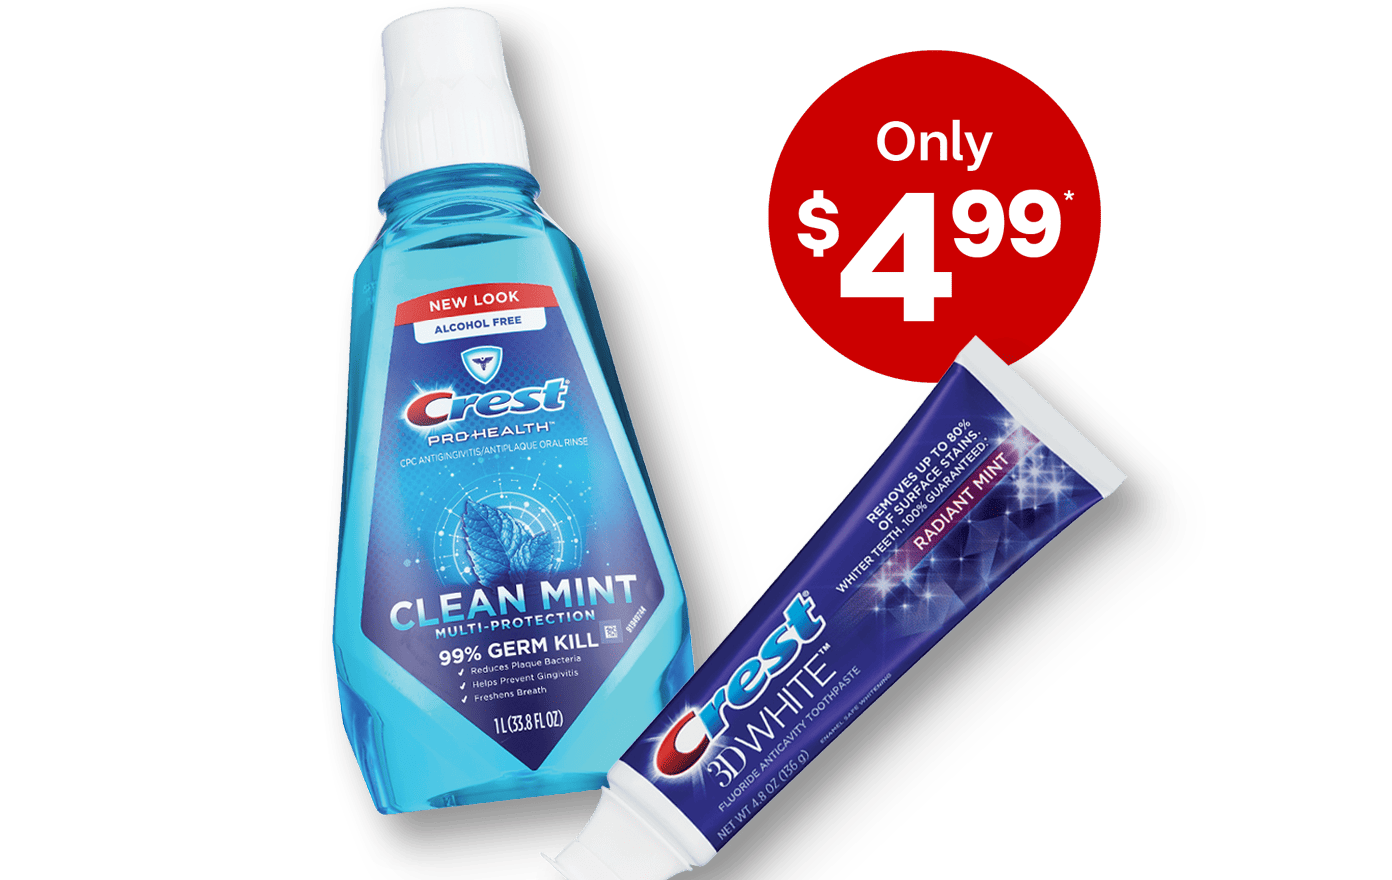 Only $4.99, select Crest oral care products